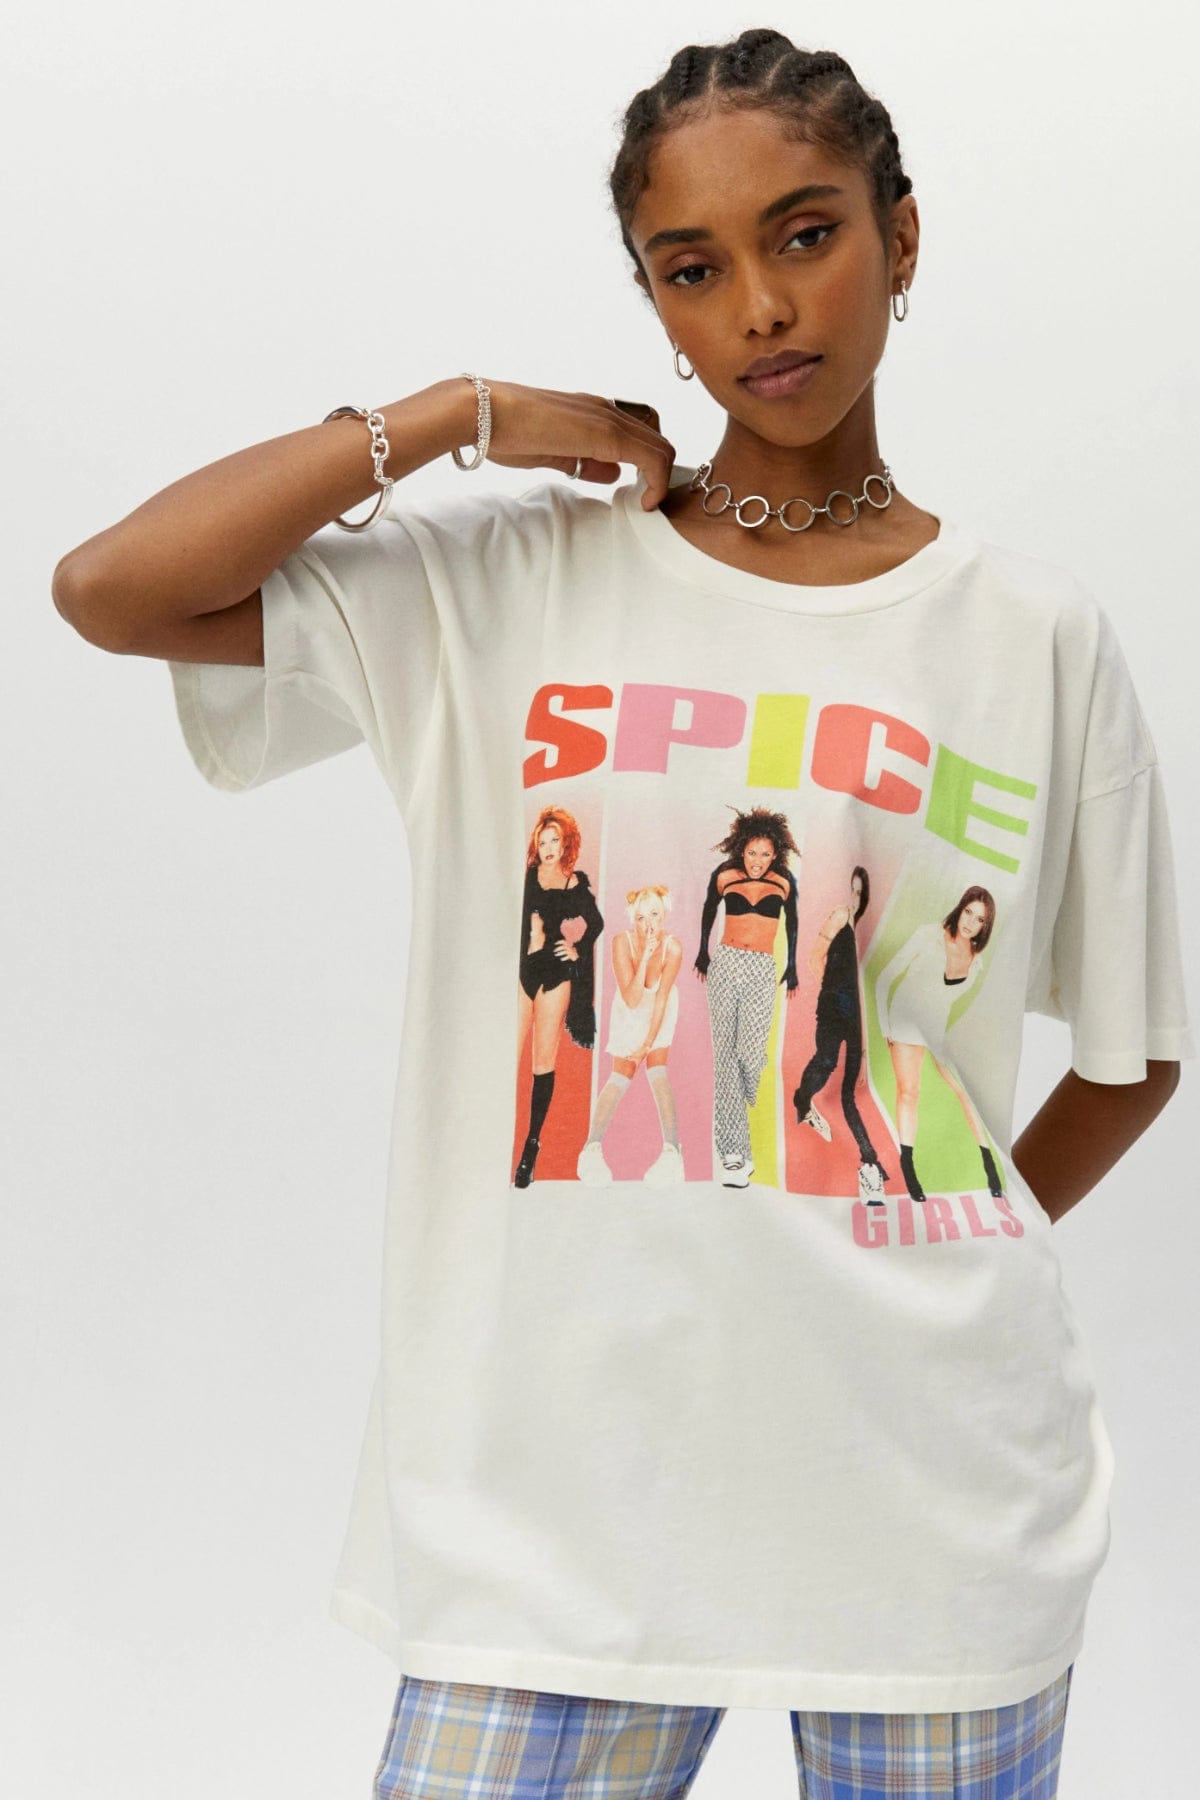 DAYDREAMER Spice Girls Spice Up Your Life Merch Graphic Tee - Shirts &amp; Tops - Blooming Daily